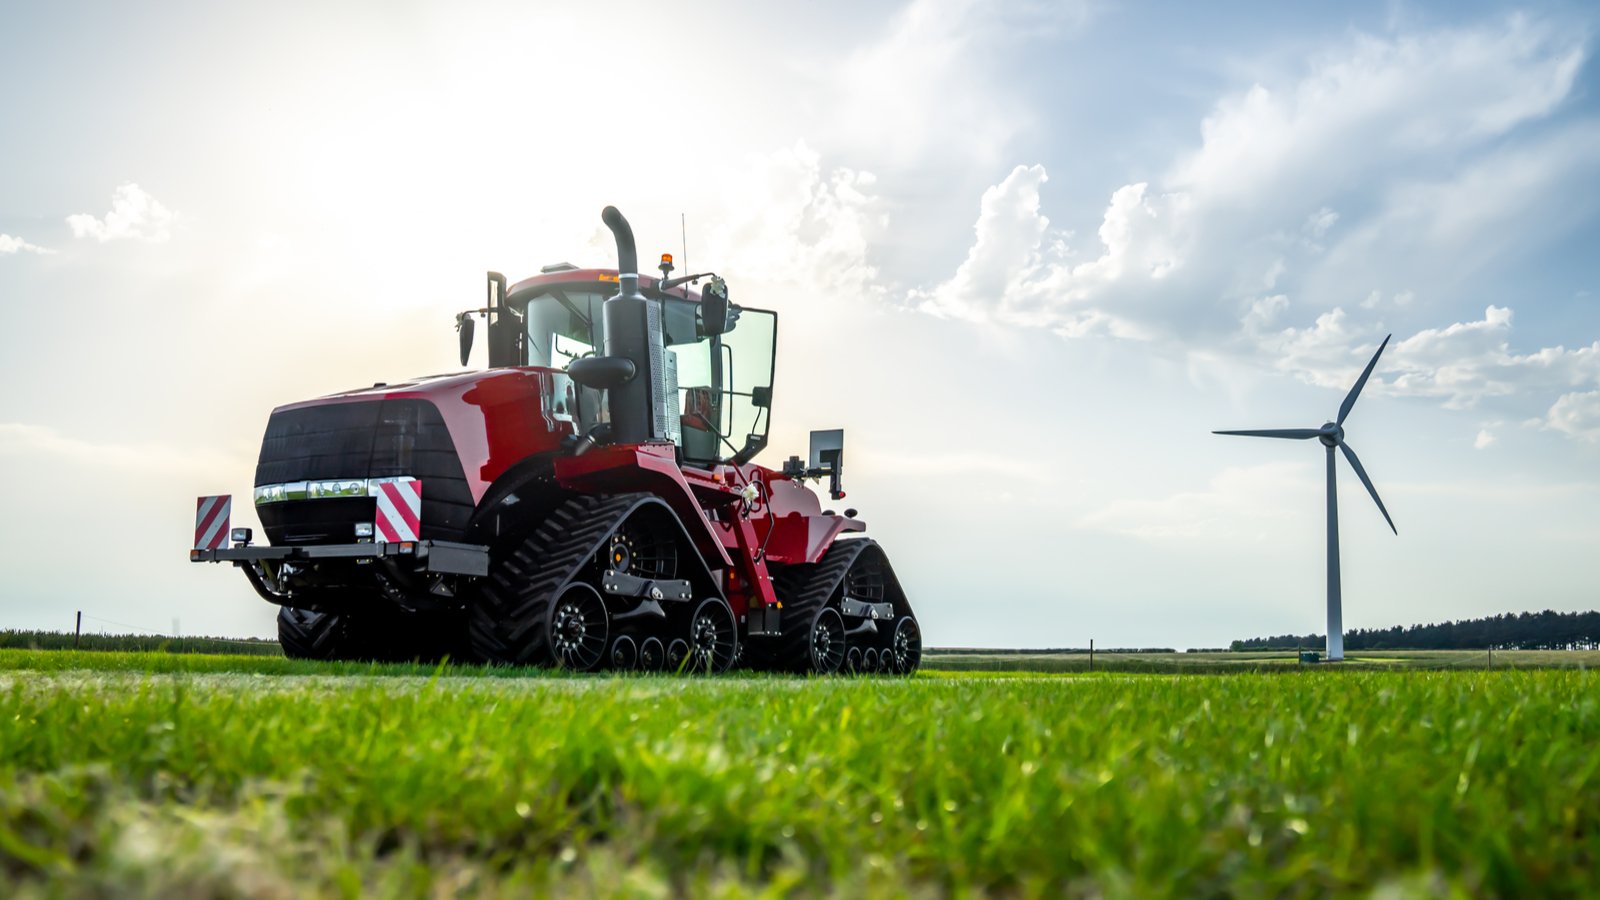 IDEX stock: An electric tractor sits in a field on a sunny day with a wind turbine in the background.